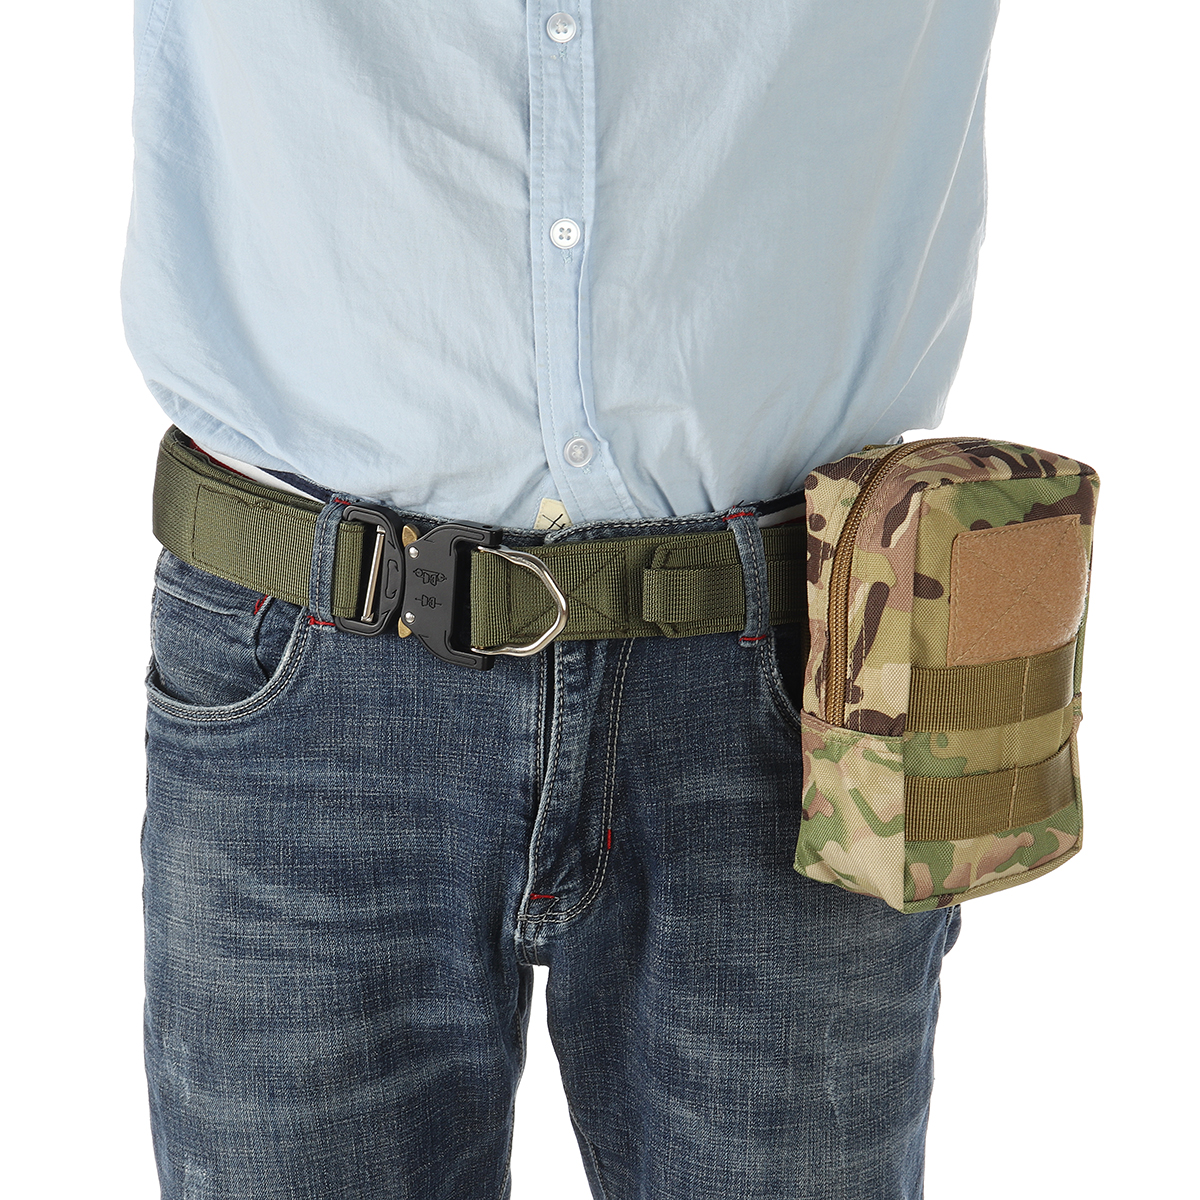 Military-Tactical-Camo-Belt-Pouch-Bag-Pack-Phone-Bags-Molle-Pouch-Camping-Waist-Pocket-Bag-Phone-Cas-1777605-11